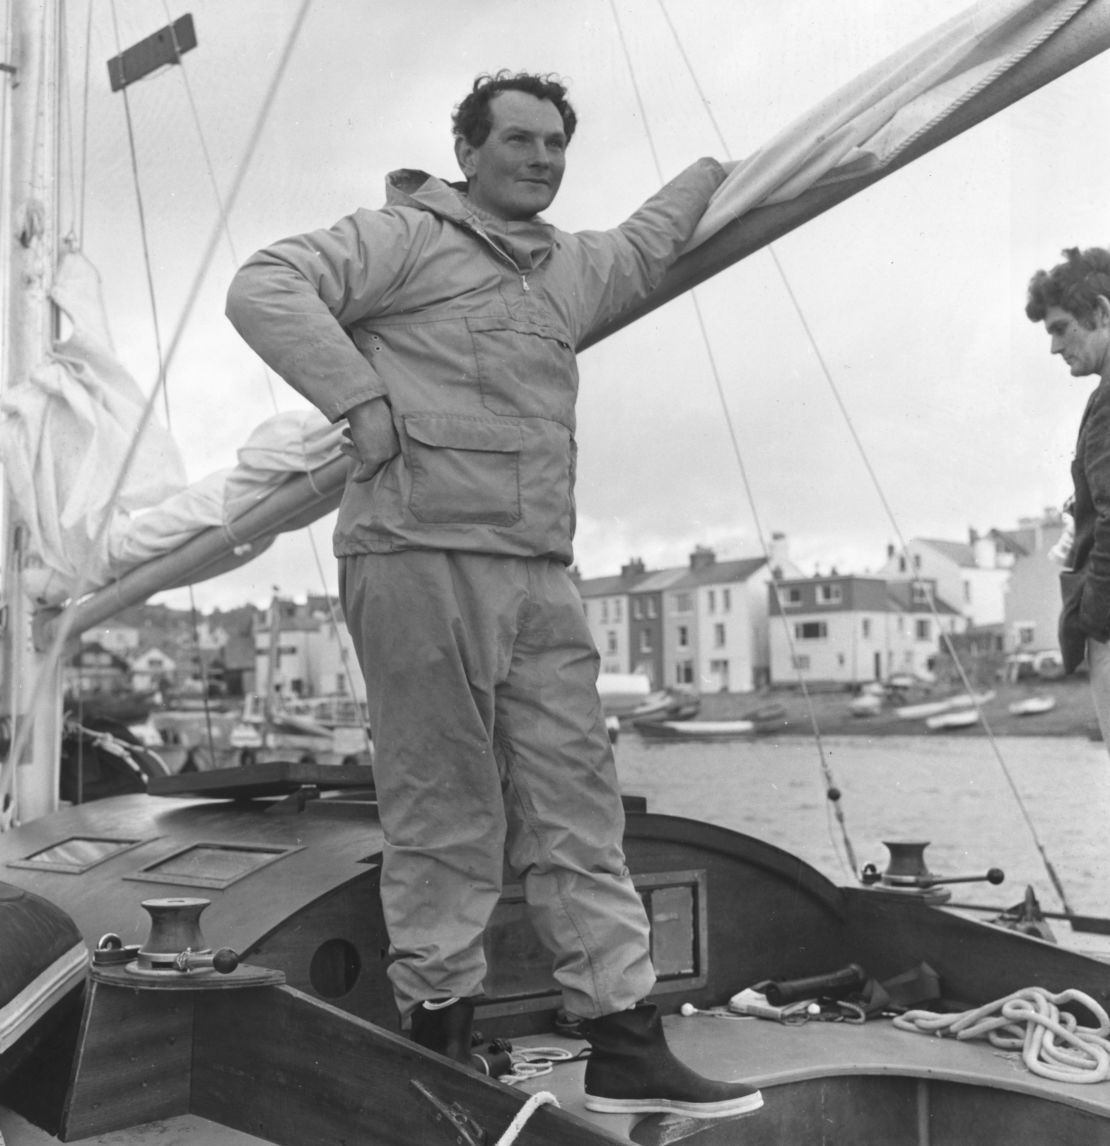 Donald Crowhurst was the man who inspired a pair of movies about his life. 